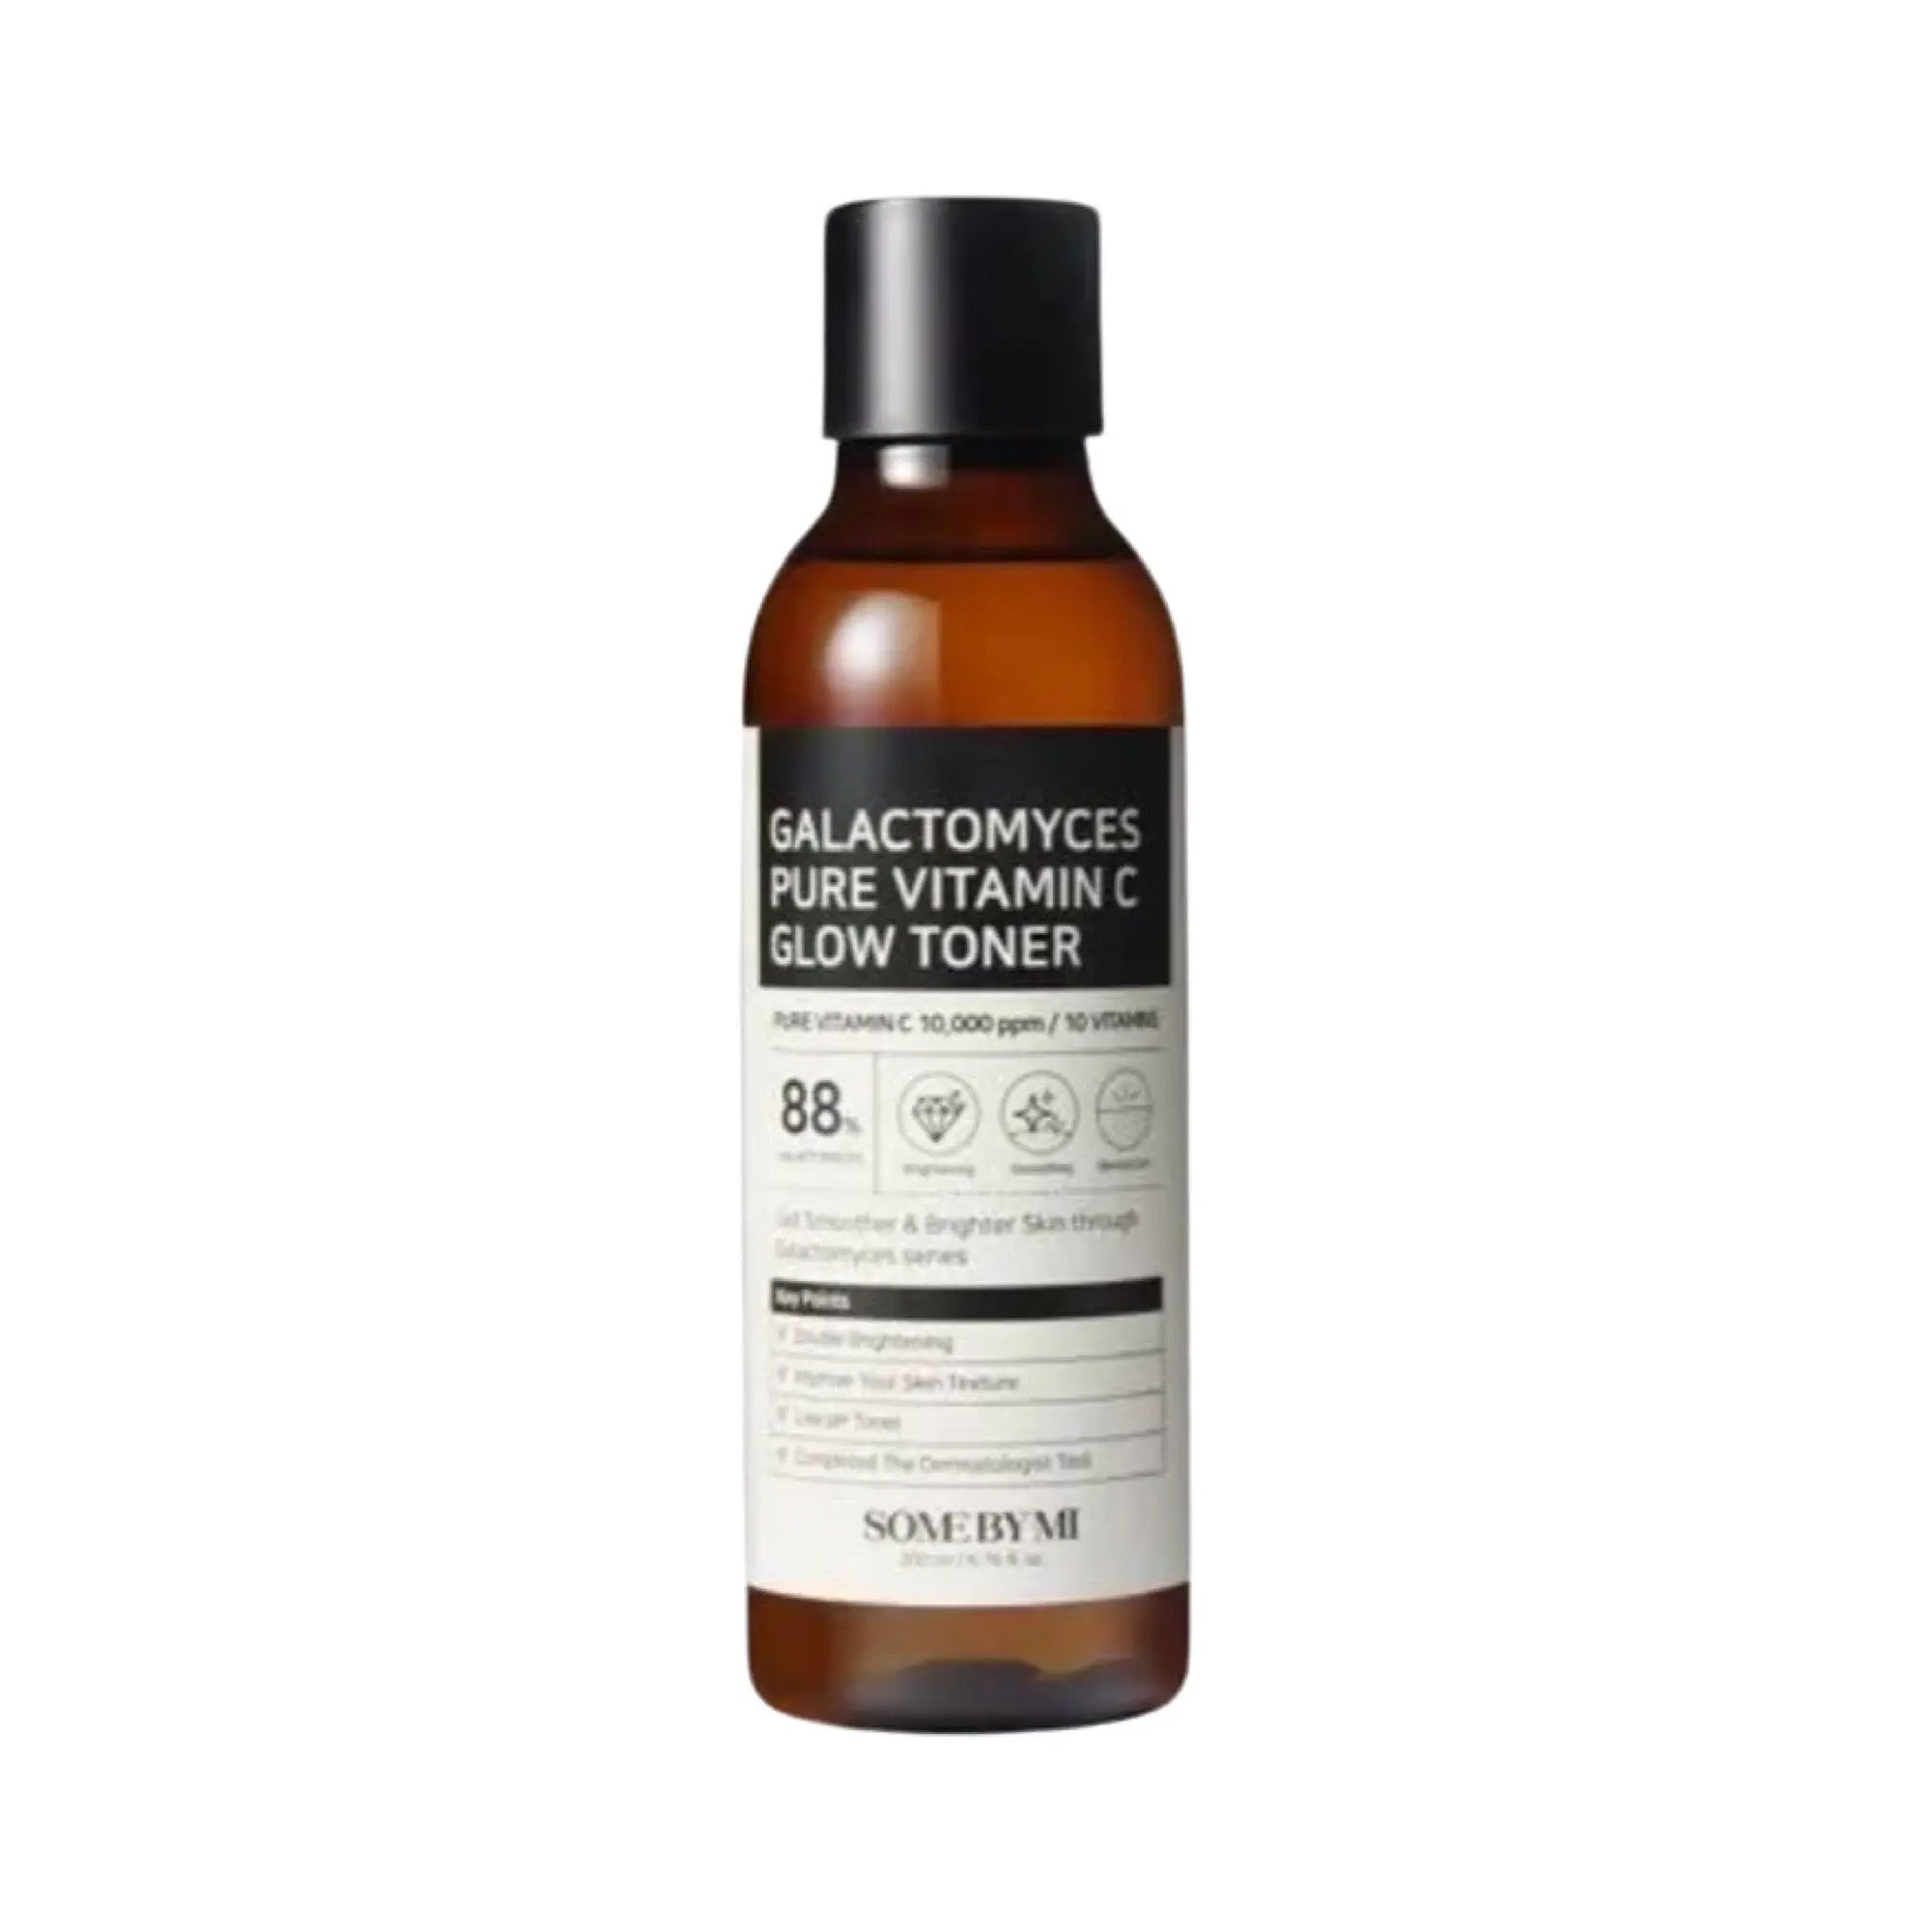 Some By Mi - Galactomyces Pure Vitamin C Glow Toner 200mL Some By Mi